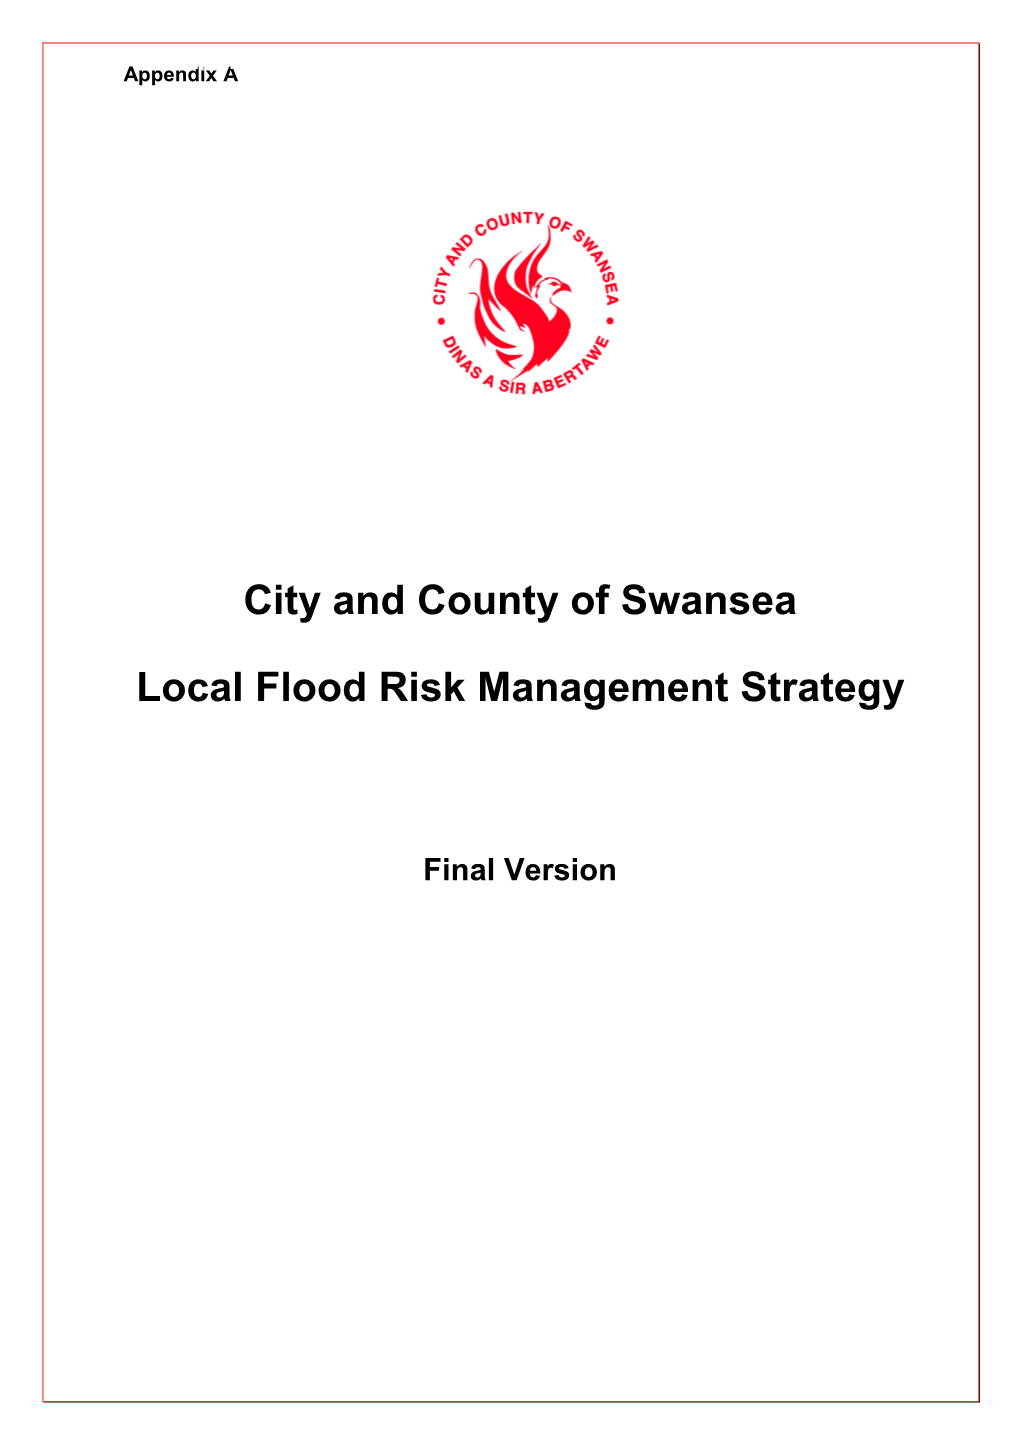 City and County of Swansea Local Flood Risk Management Strategy